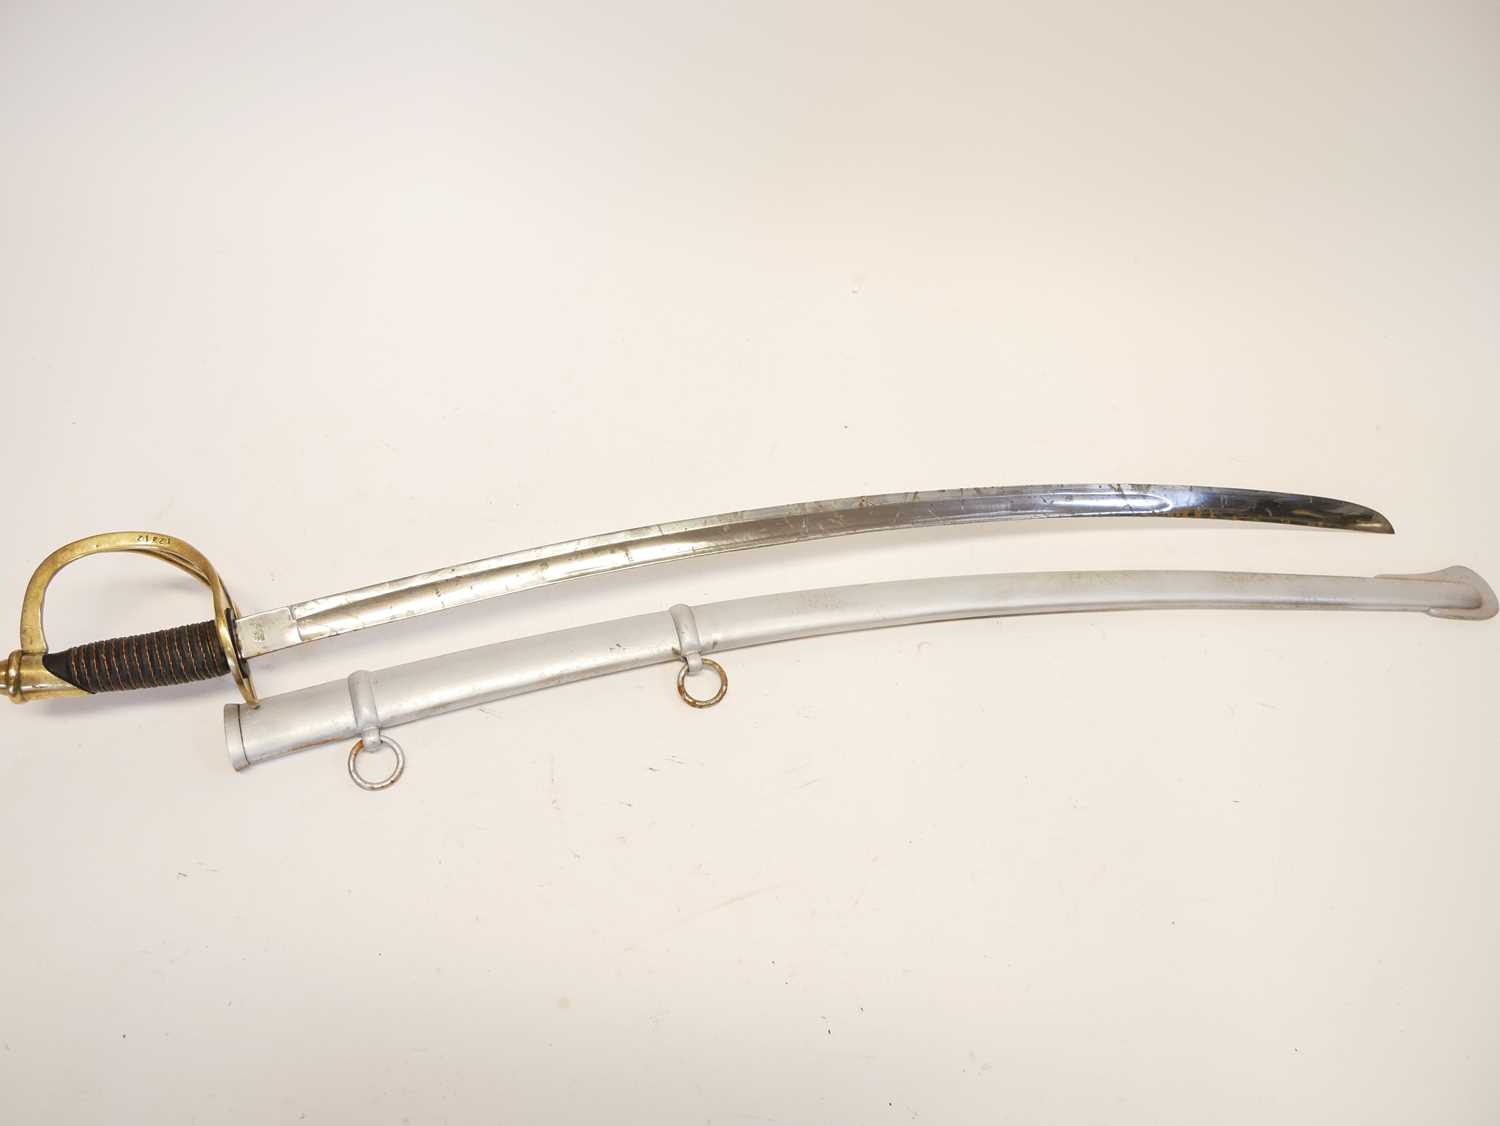 Reproduction US wrist breaker cavalry sabre and scabbard, curved fullered blade with brass guard and - Image 11 of 11